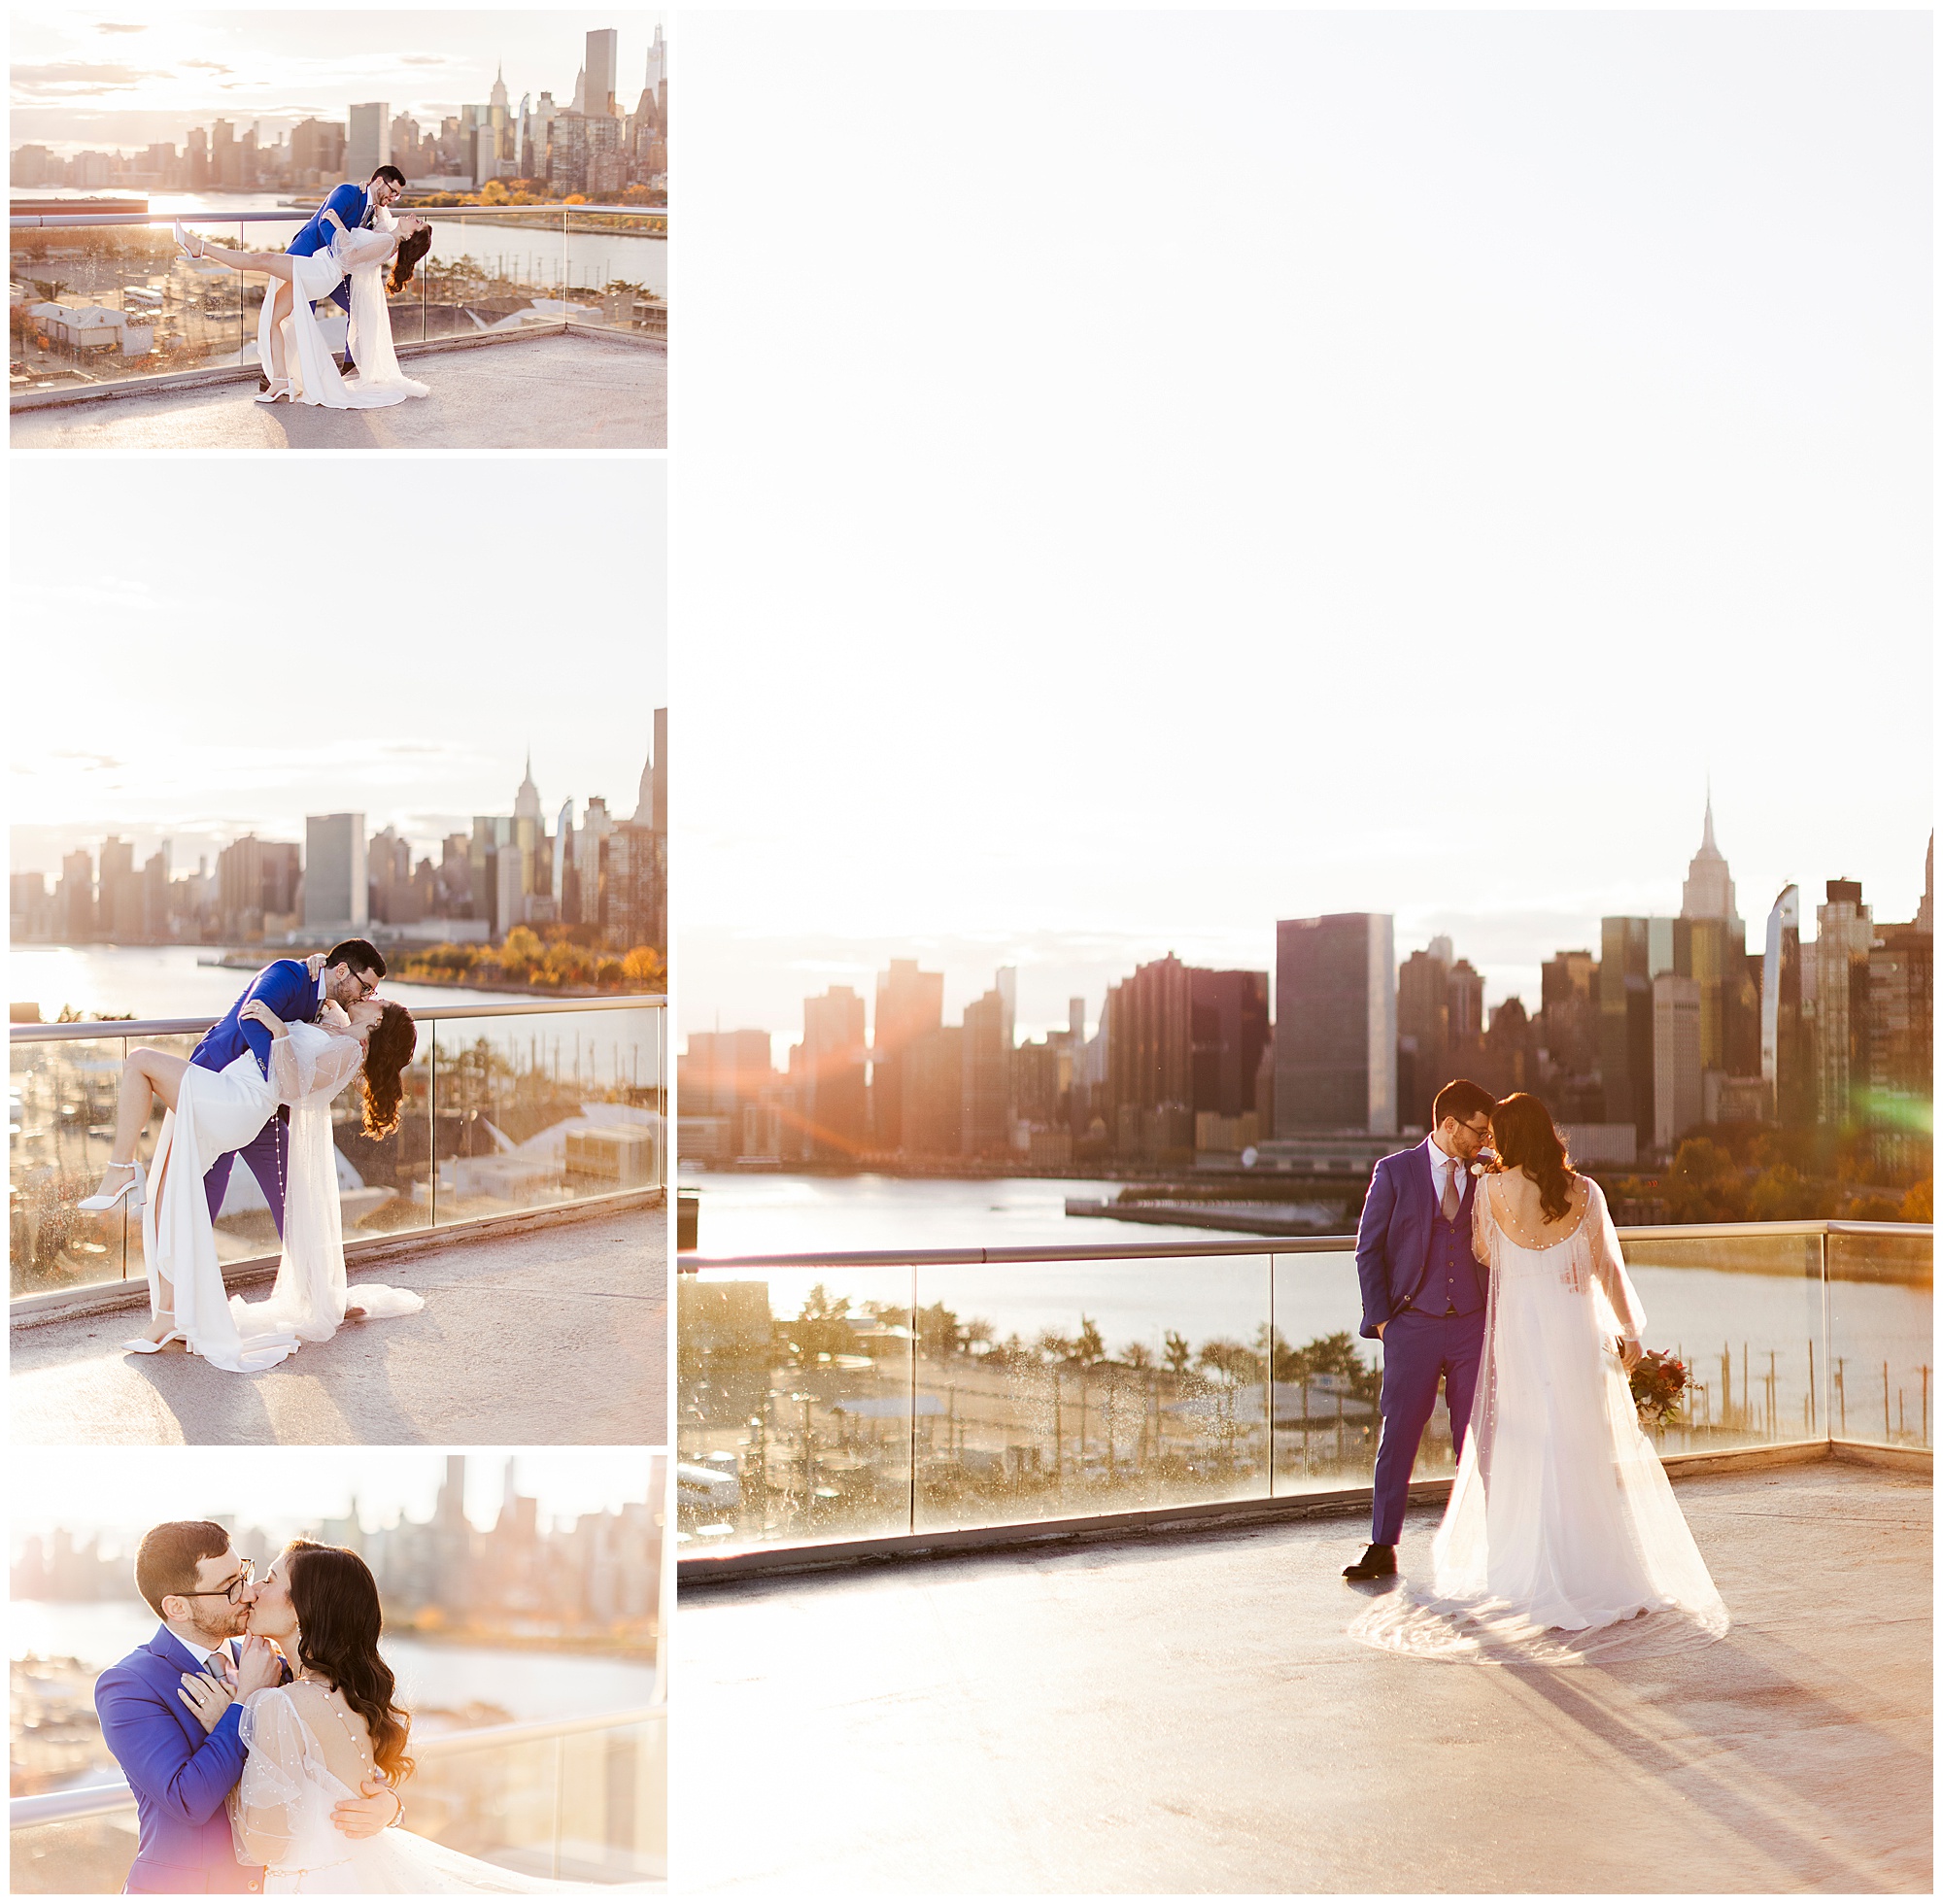 Personal winter wedding at the ravel hotel